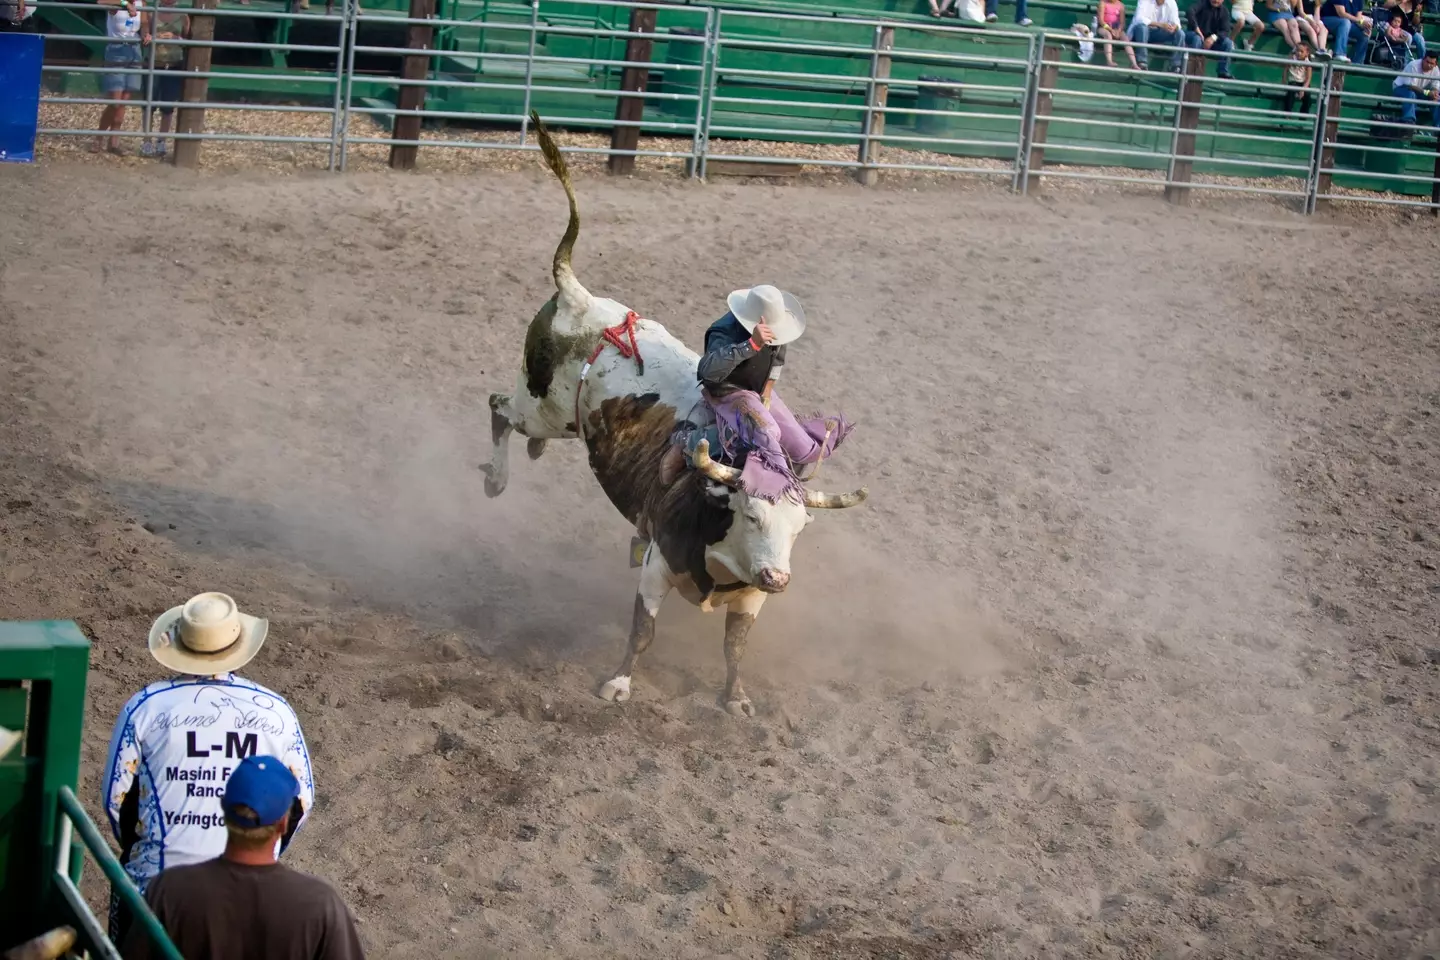 Bull riding is a highly dangerous sport [Stock Image].